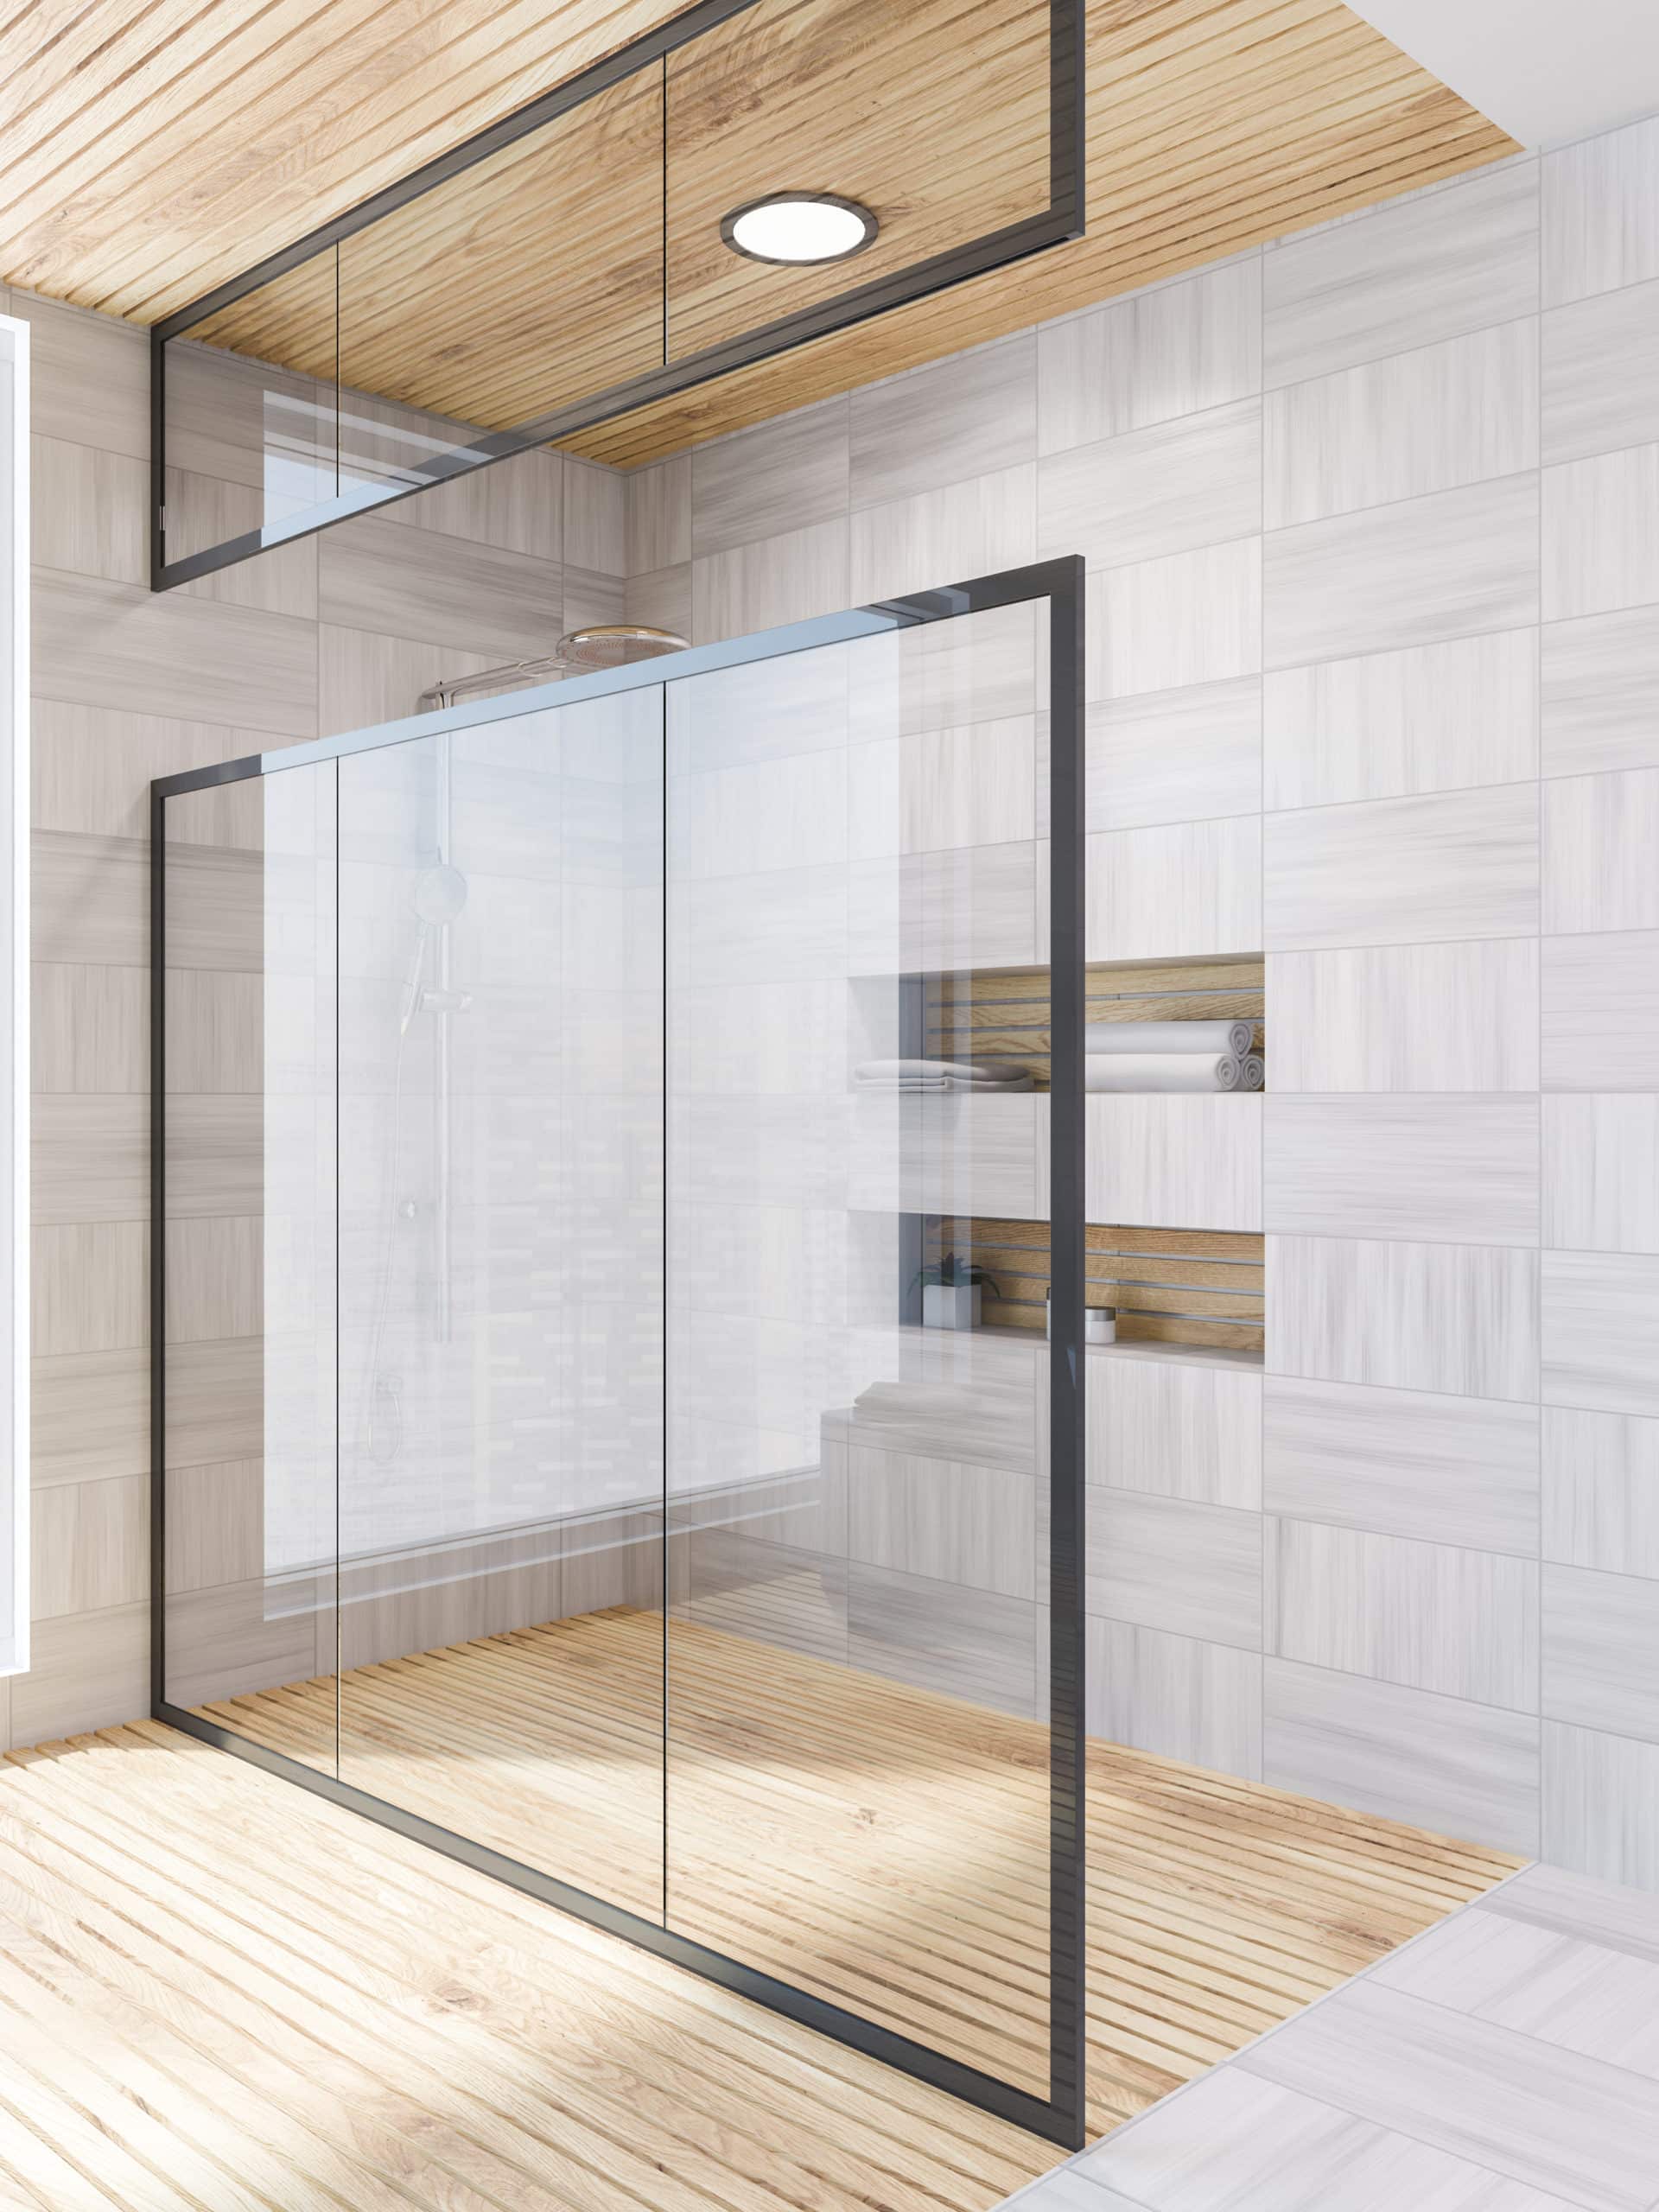 A bathroom with a wooden floors and a walk-in shower featuring a glass door.